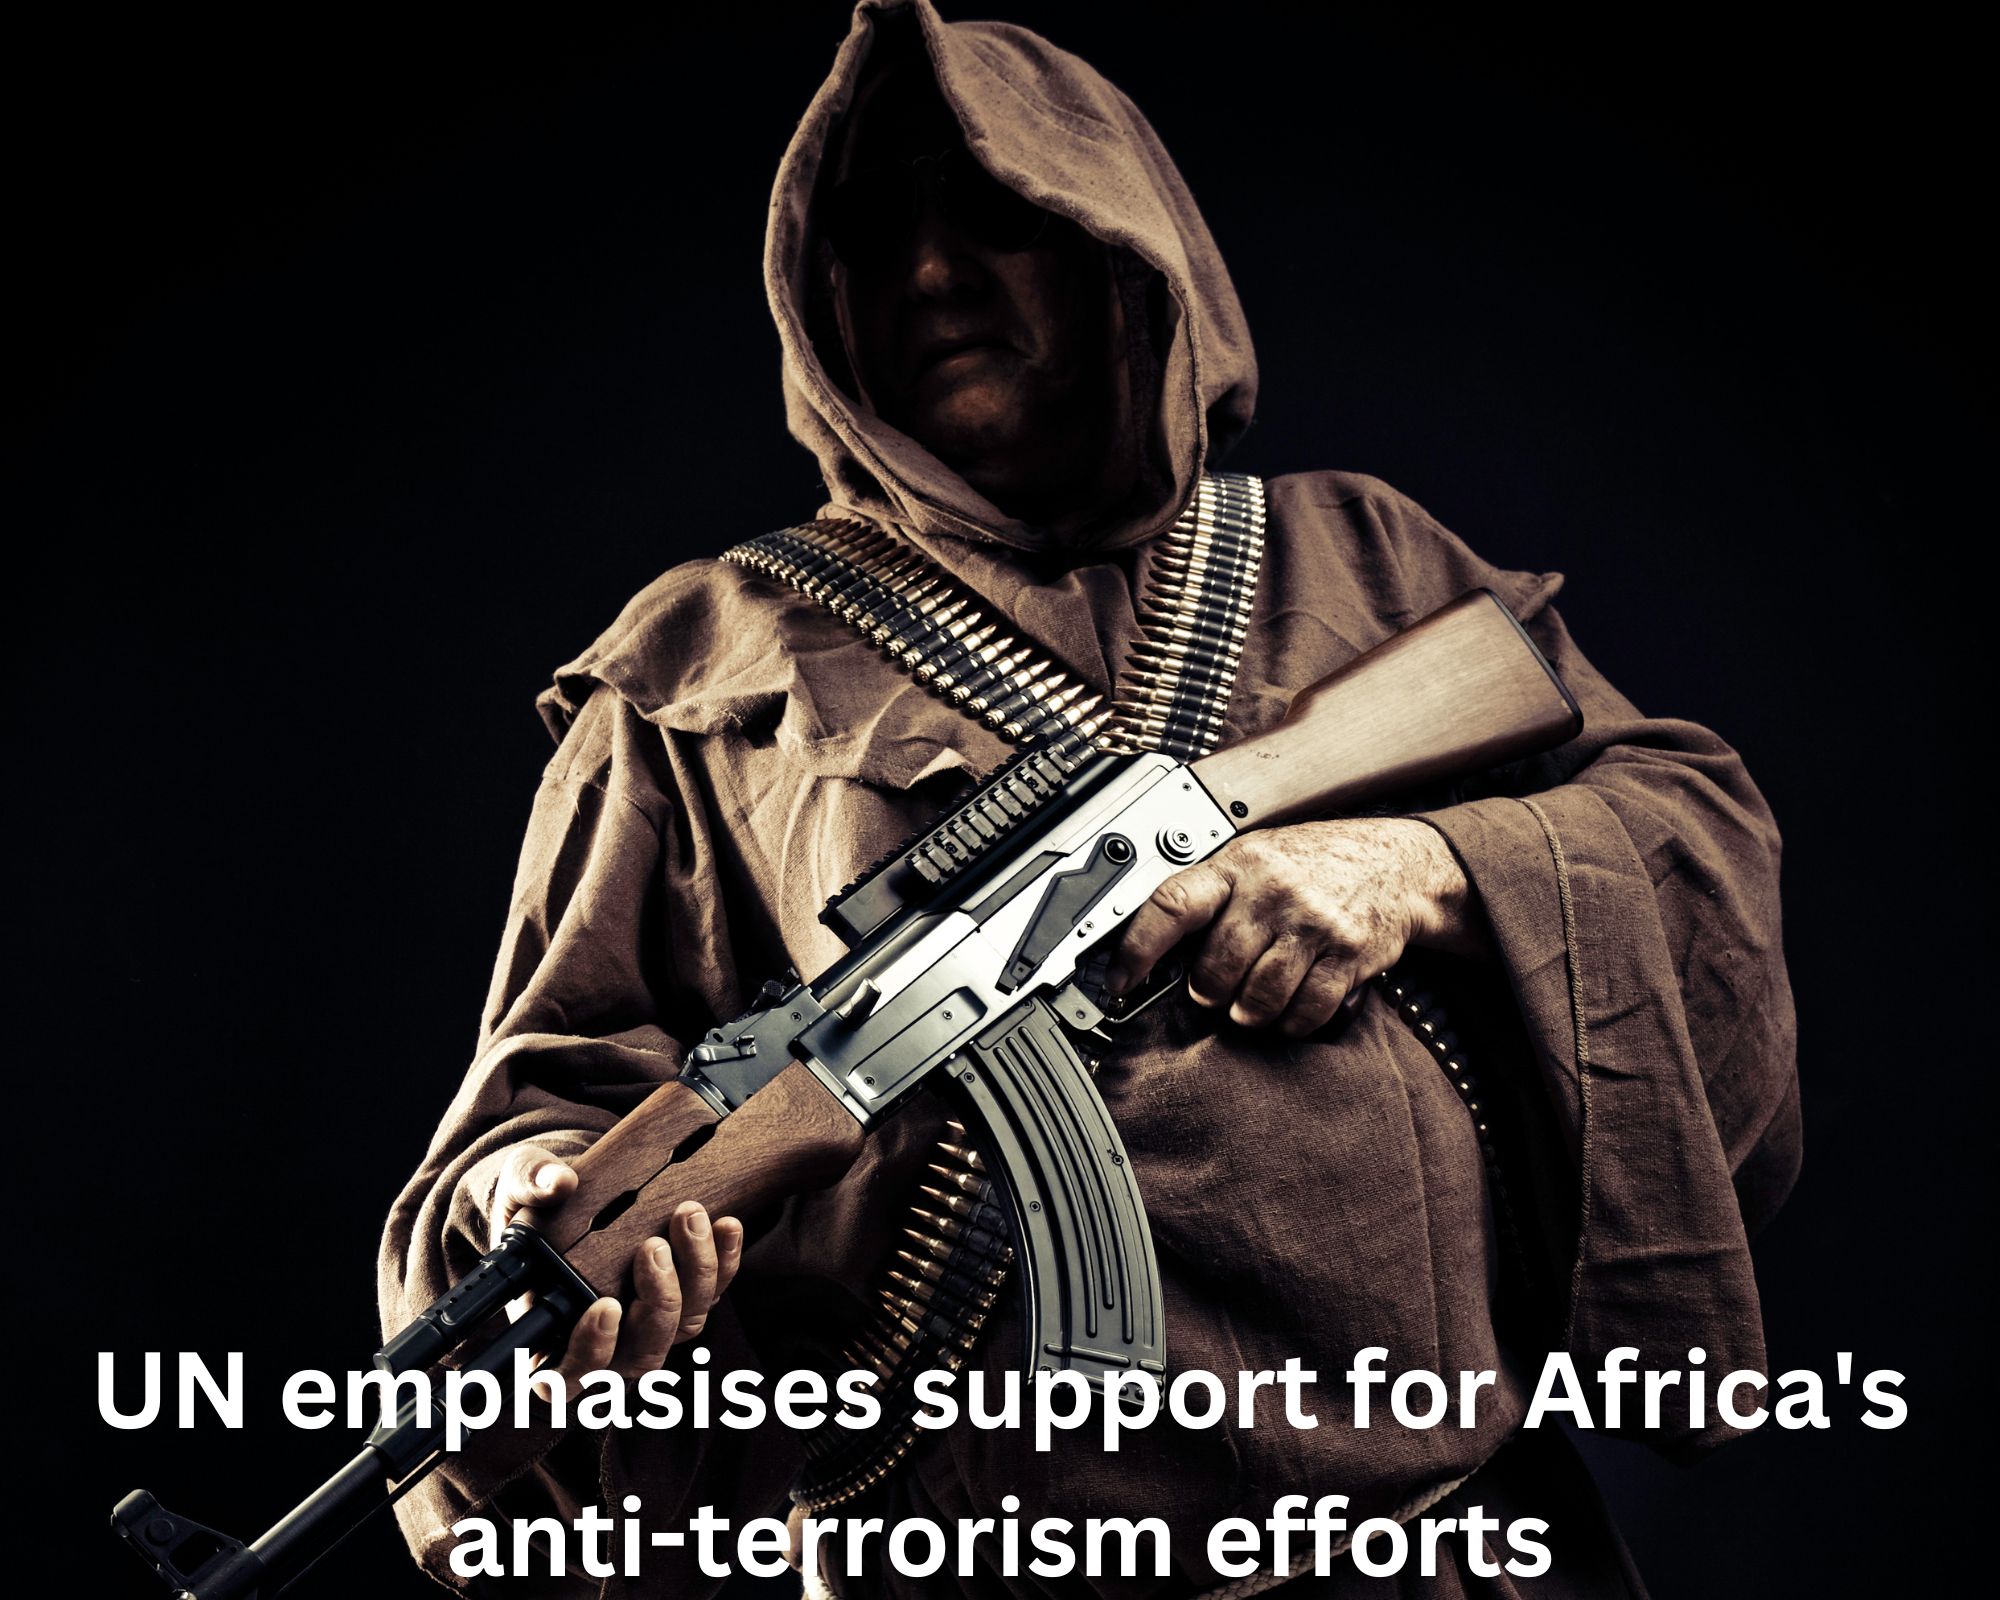 UN emphasises support for Africa's anti-terrorism efforts